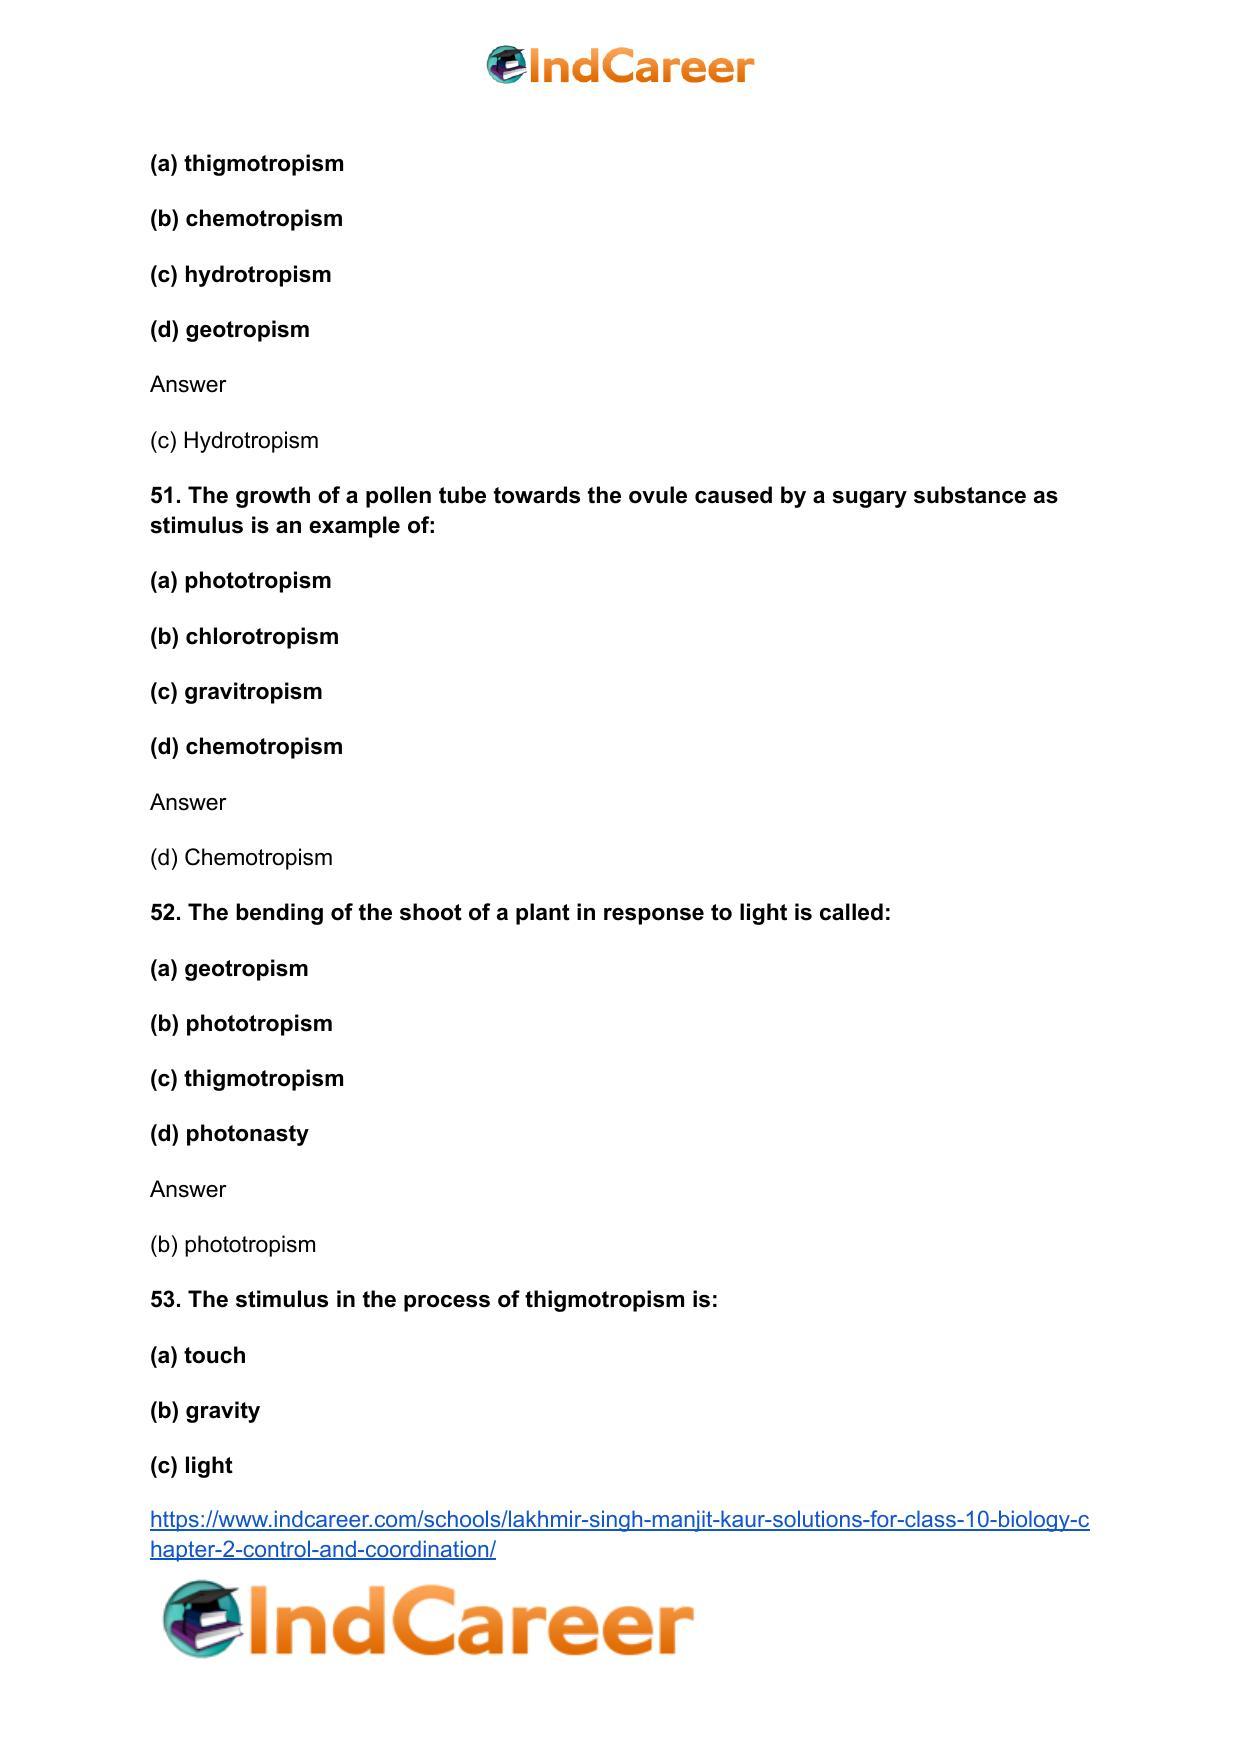 Lakhmir Singh Manjit Kaur  Solutions for Class 10 Biology: Chapter 2- Control And Coordination - Page 22